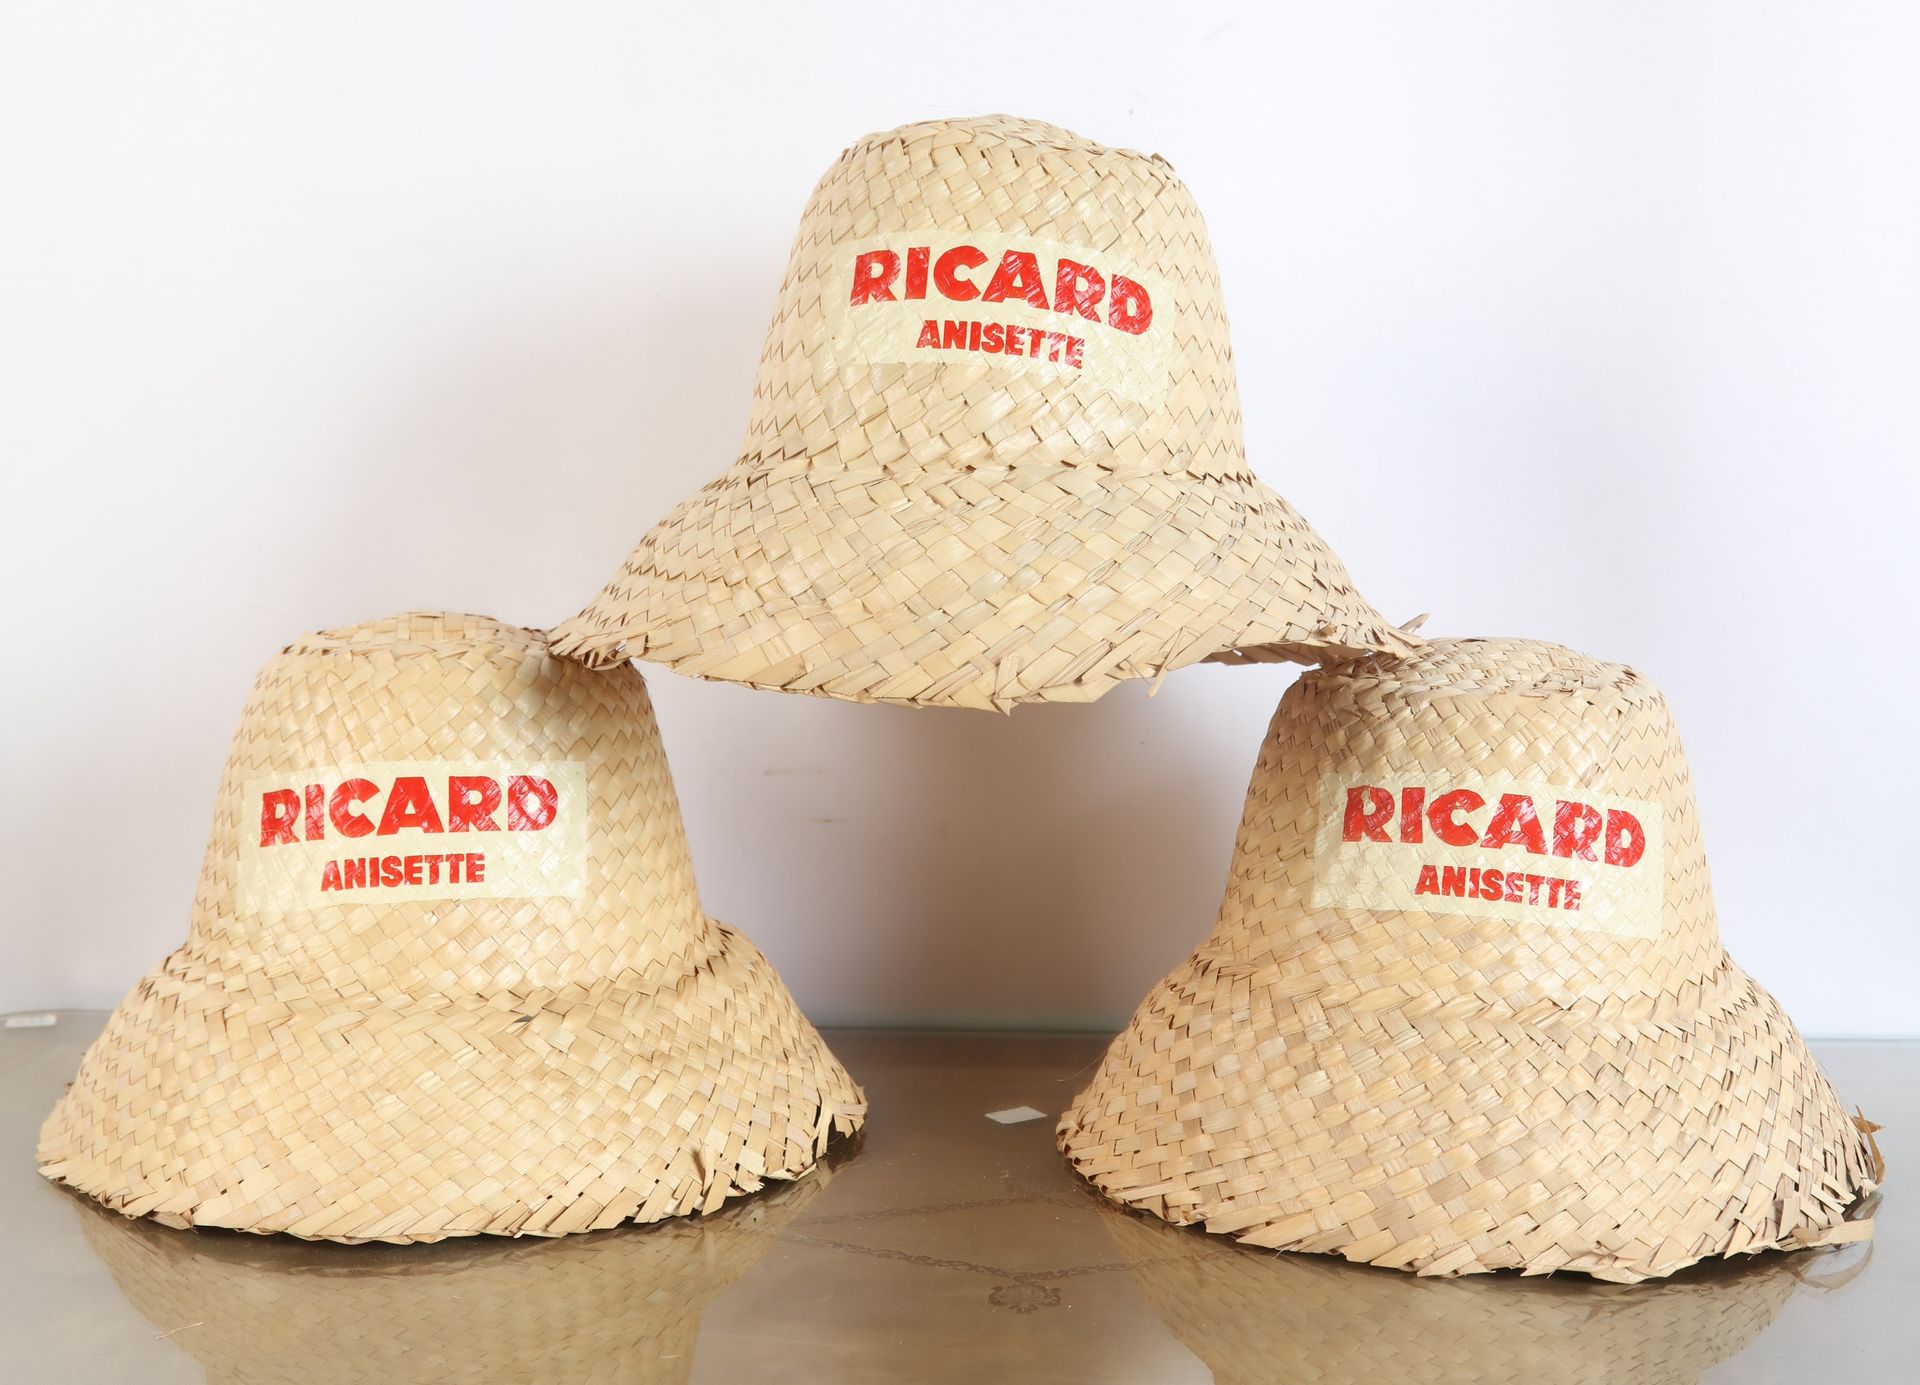 Null 3 hats braided "Ricard, Anisette", clothing, towel, 45 rpm record...Adverti&hellip;